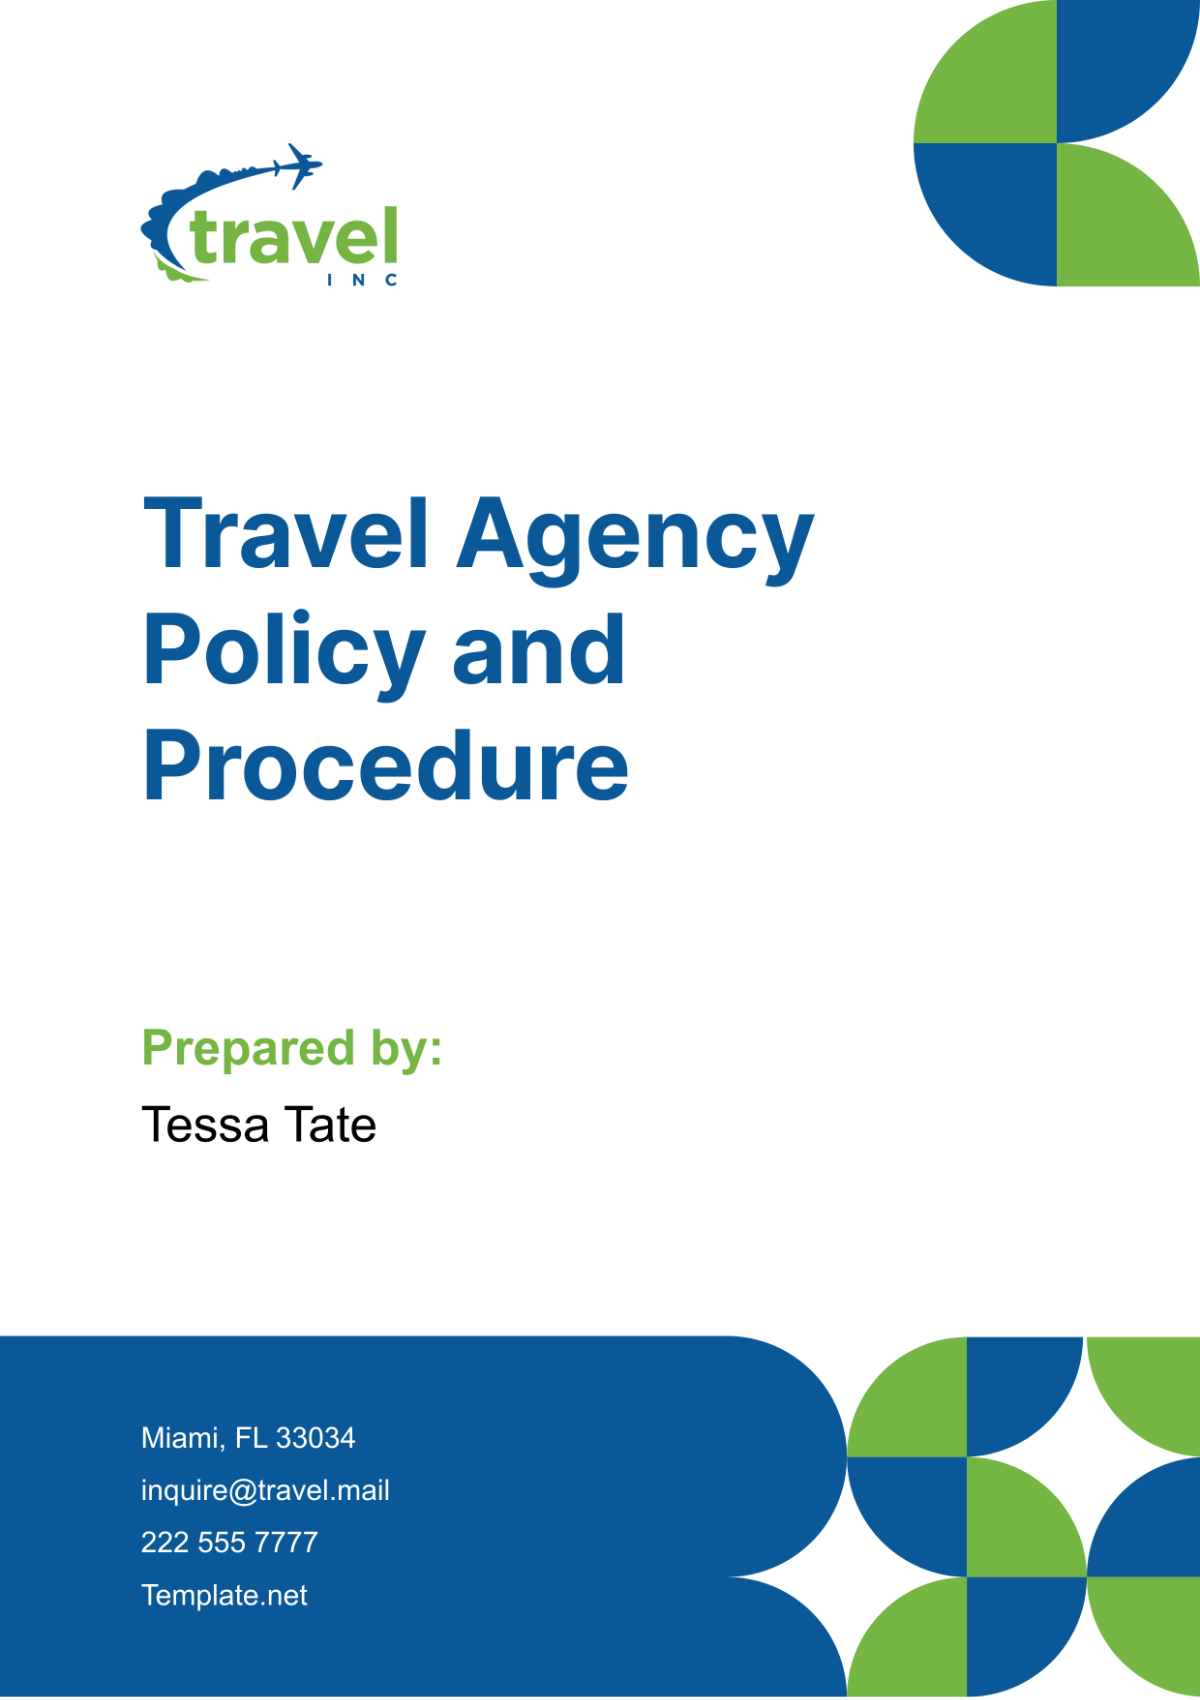 Travel Agency Policy and Procedure Template